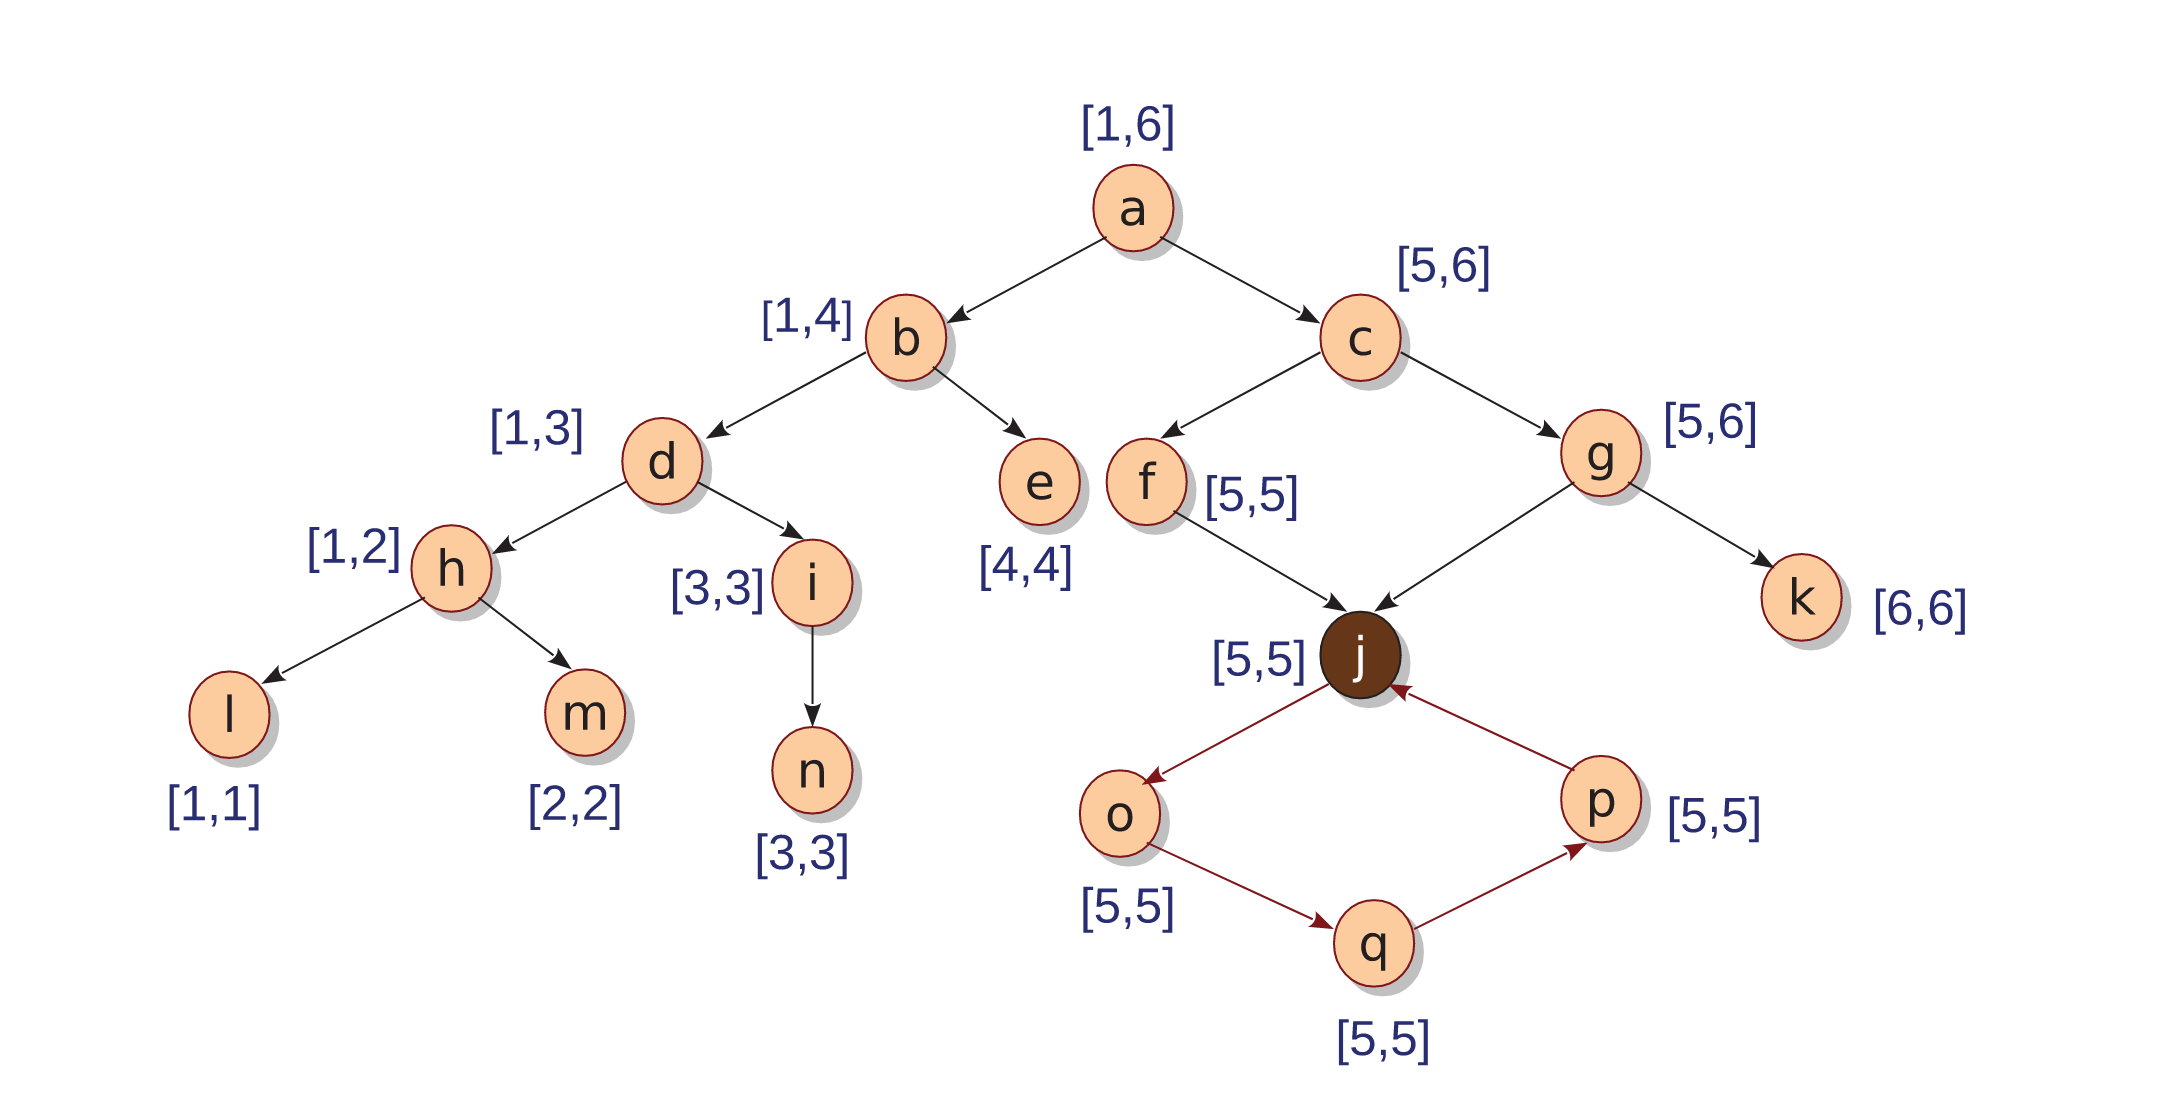 Graph with the Node Intervals assigned using the above algorithms